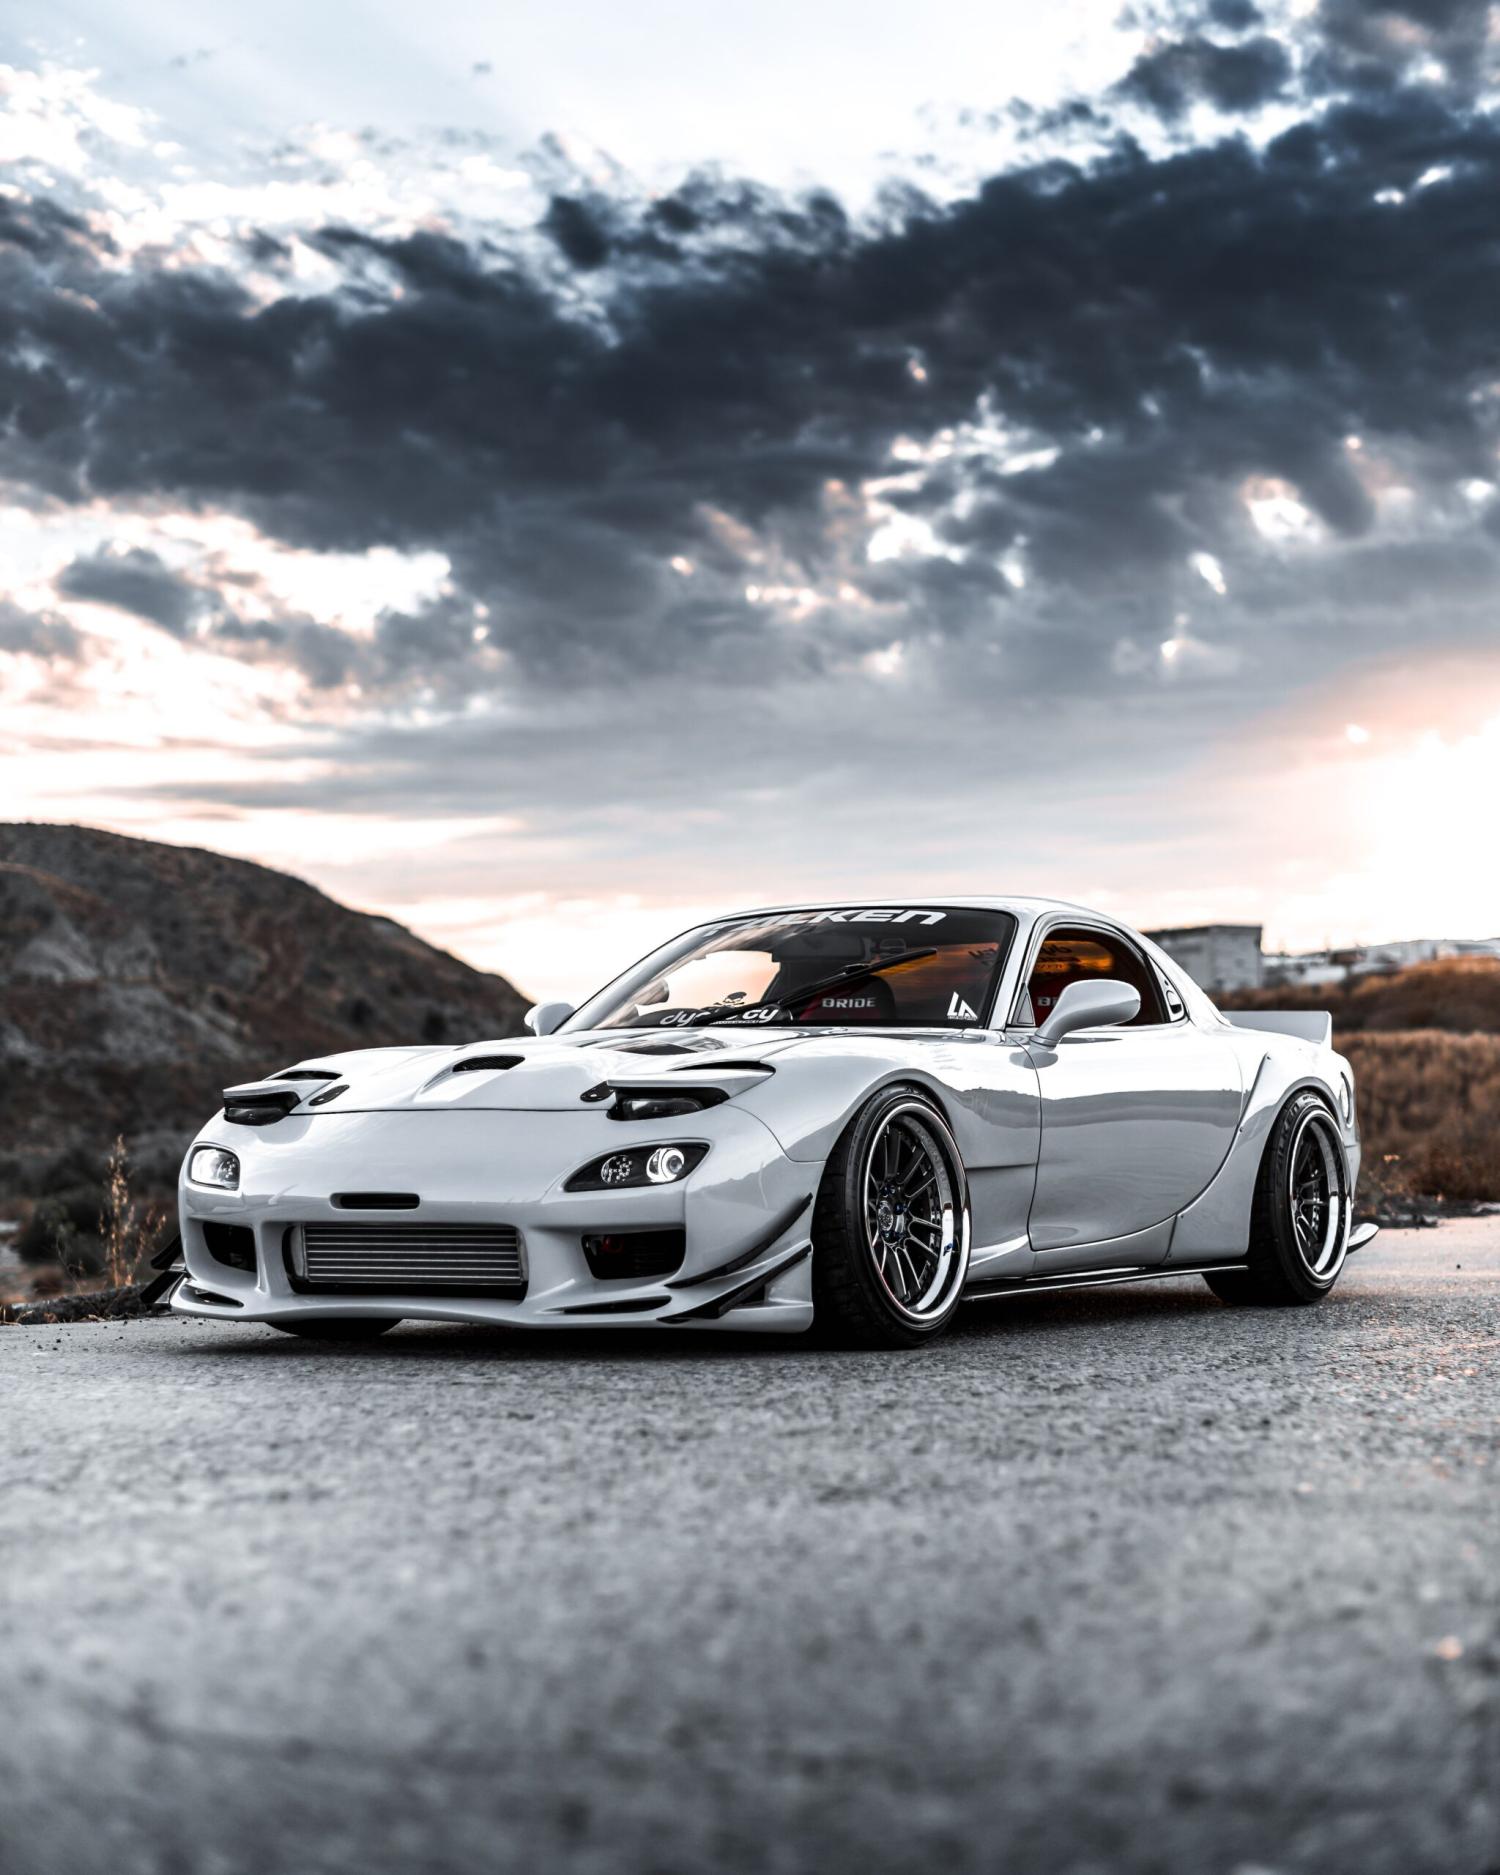 DONG PARK'S MAZDA FD RX-7